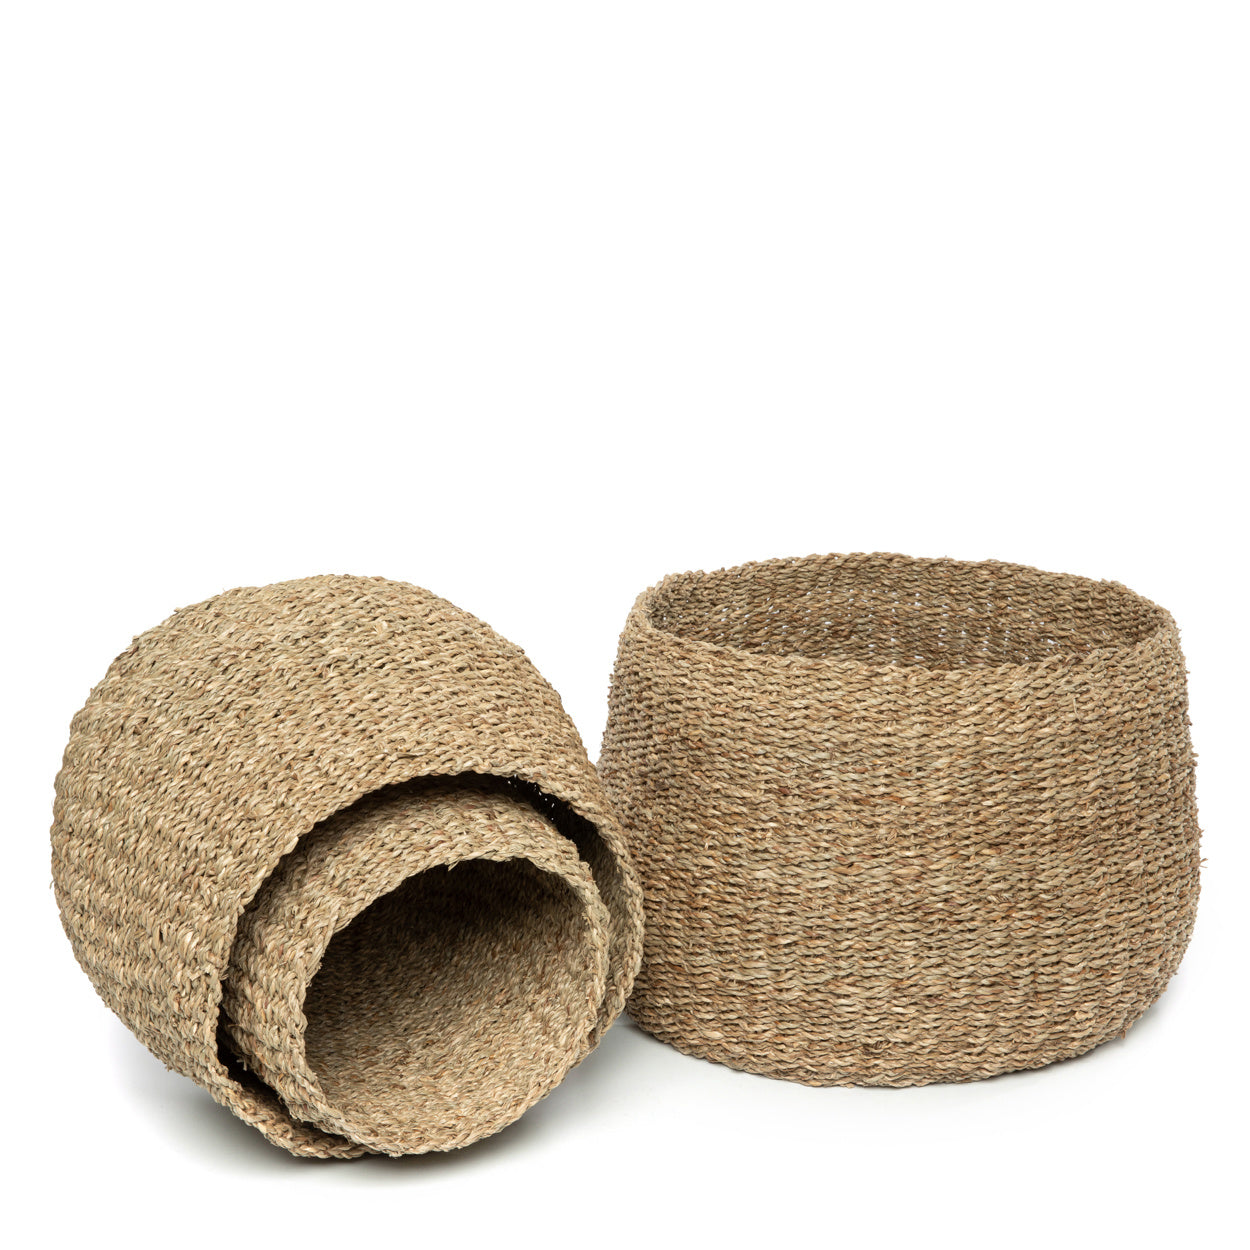 THE VUNG LAM Baskets Set of 3 side view